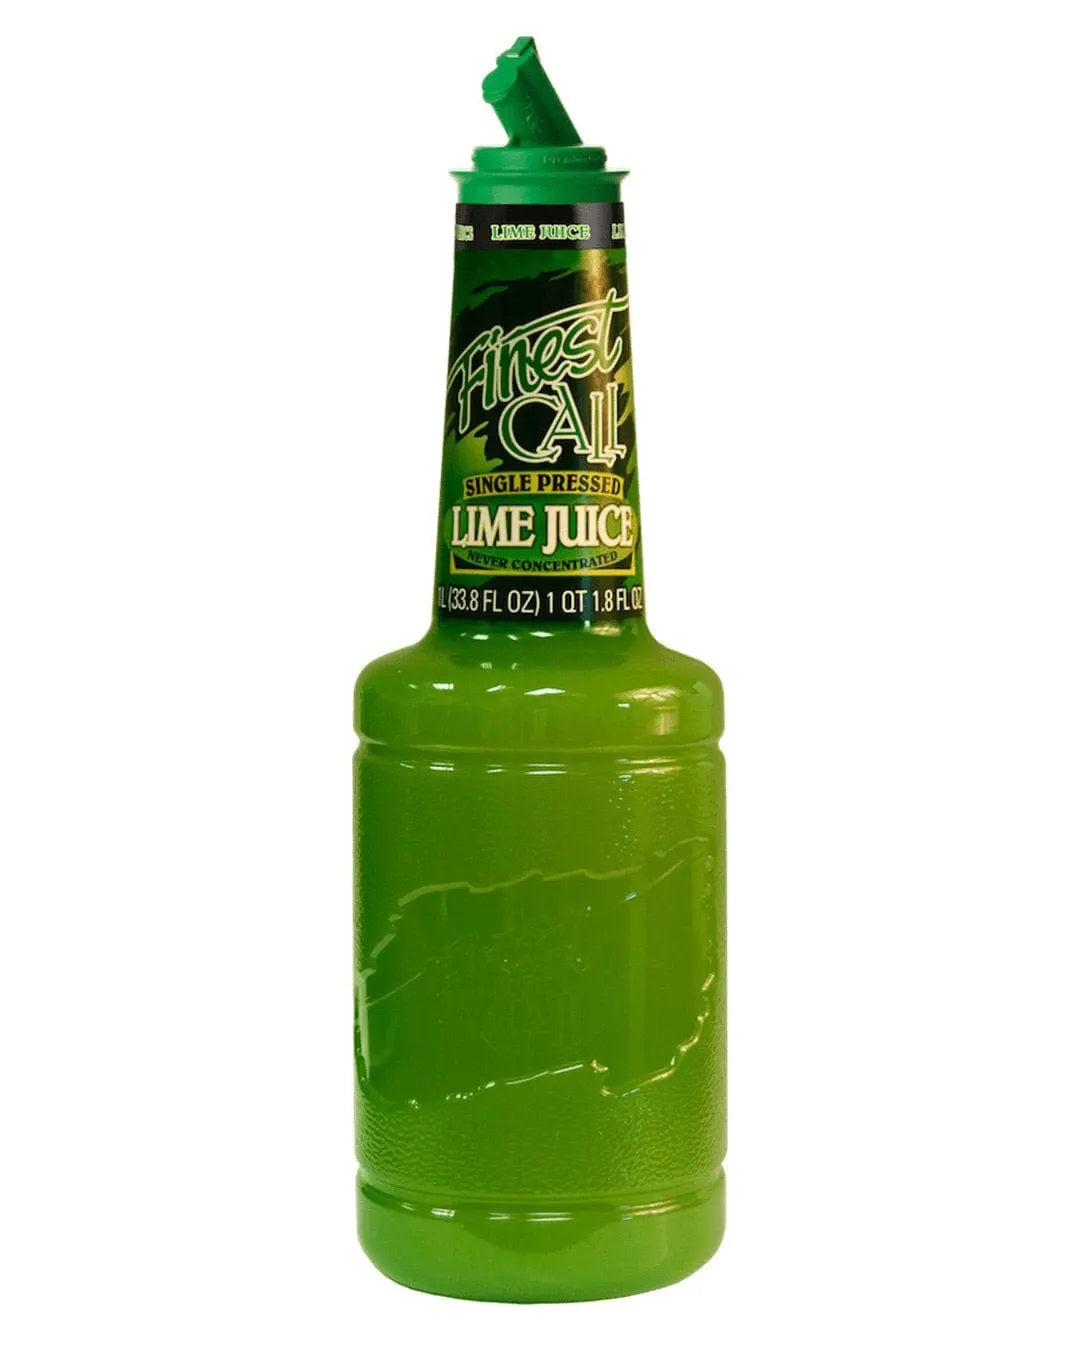 Finest Call Single Pressed Lime Juice, 1 L Soft Drinks & Mixers